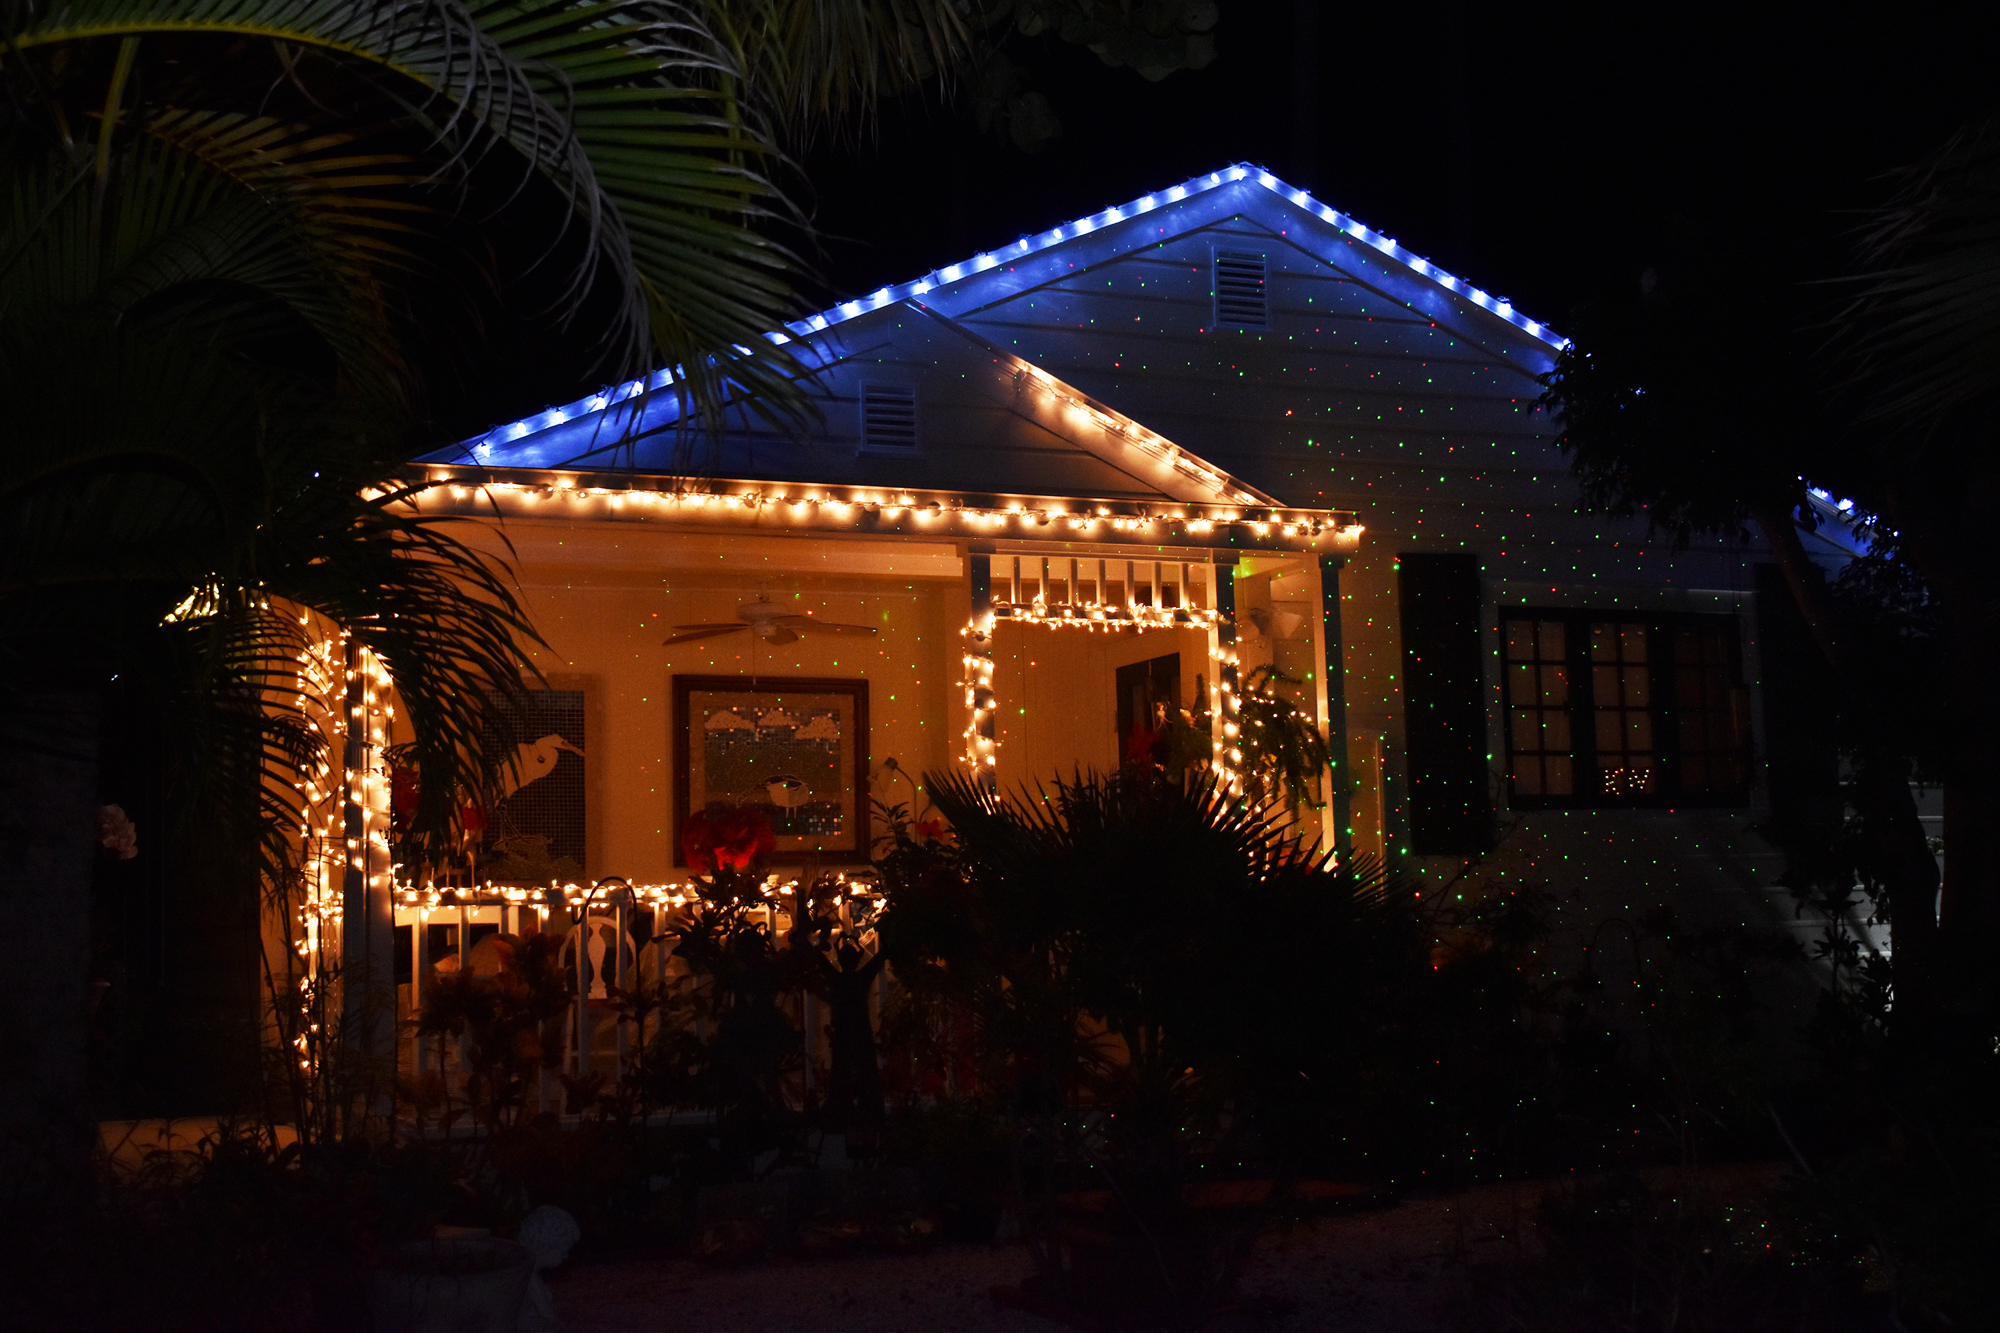 This house in the village caught our attentions with its classic white lights and laser lights.